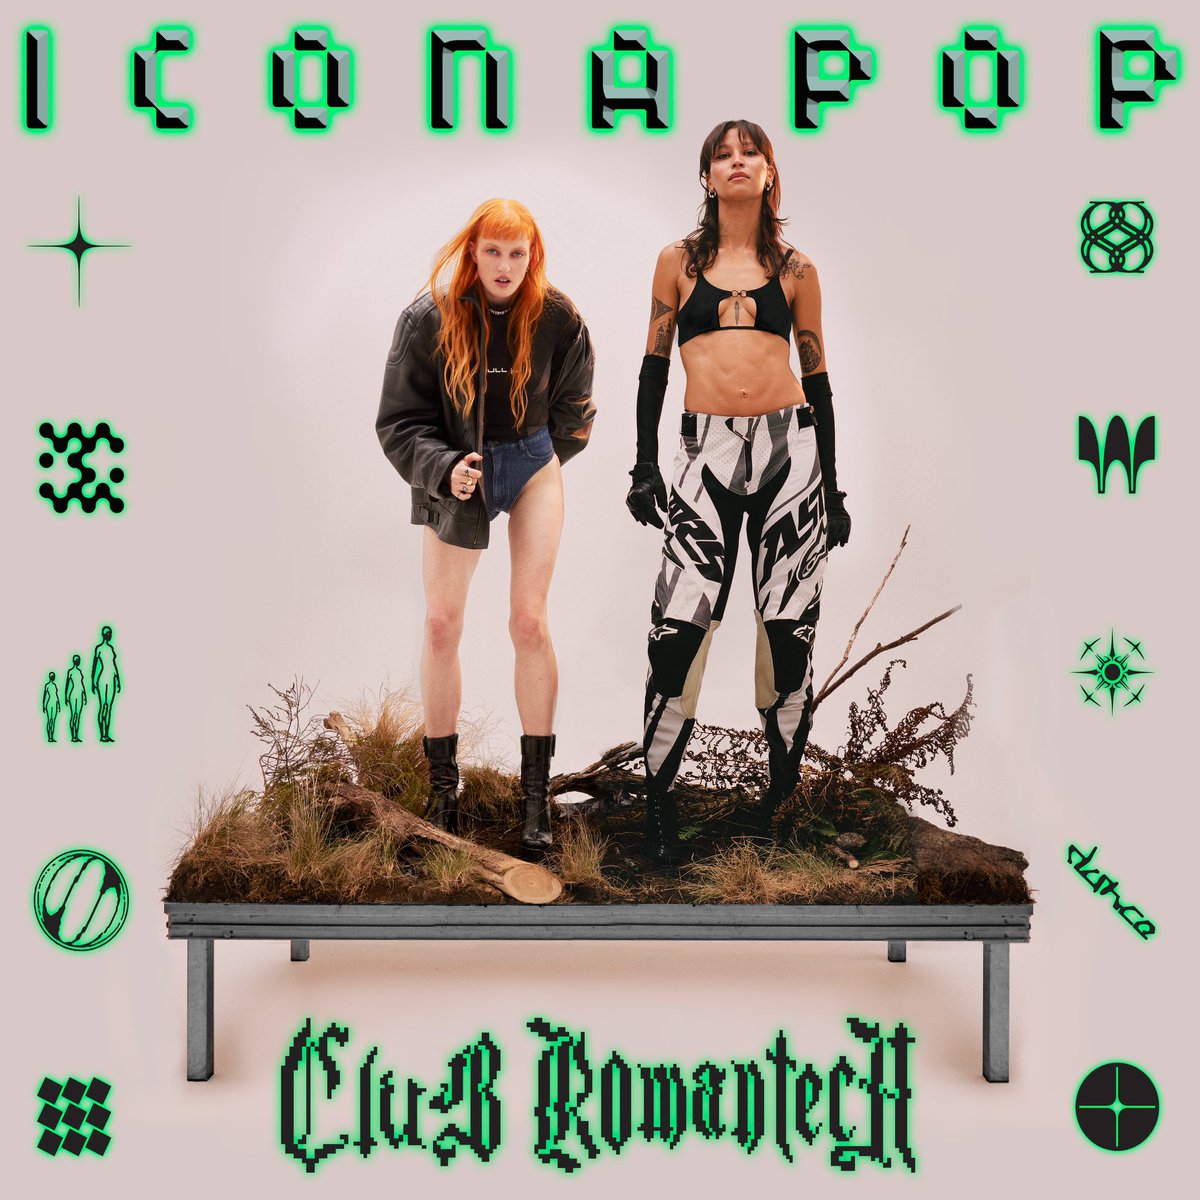 ICONS!! Stick your tongue out!!!! 𝔠𝔩𝔲𝔟 𝔯𝔬𝔪𝔞𝔫𝔱𝔢𝔠𝔥 out everywhere now 😛😛😛💚🖤